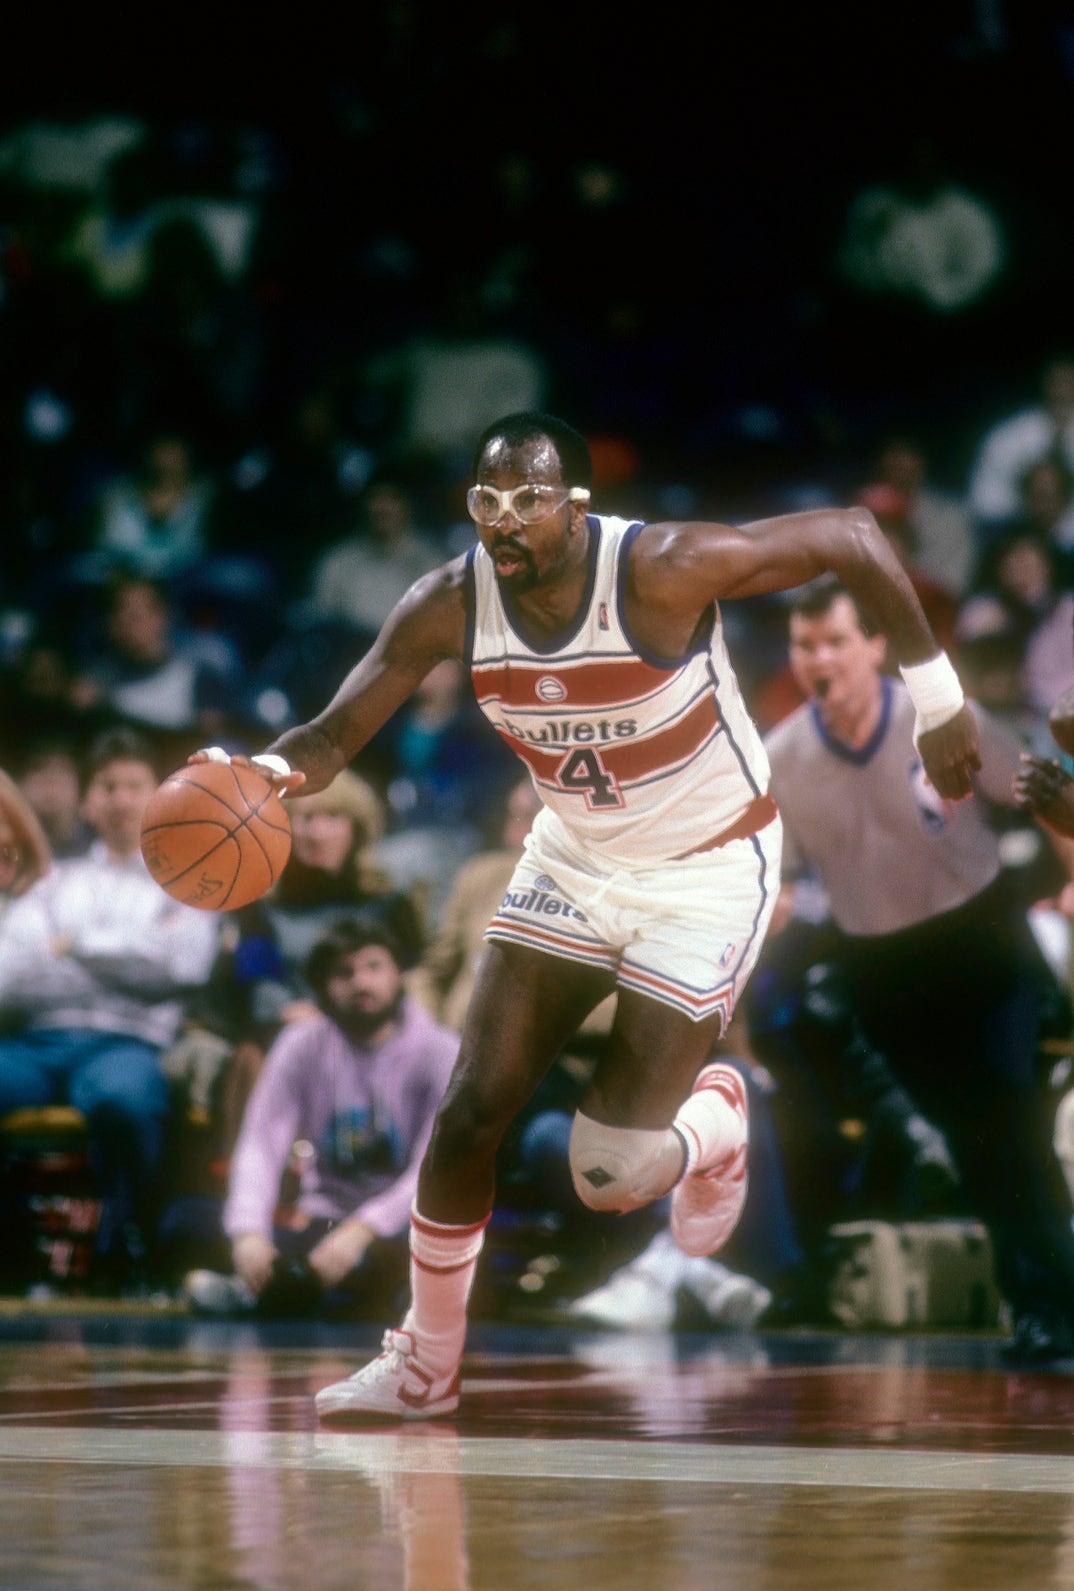 Remembering Moses Malone